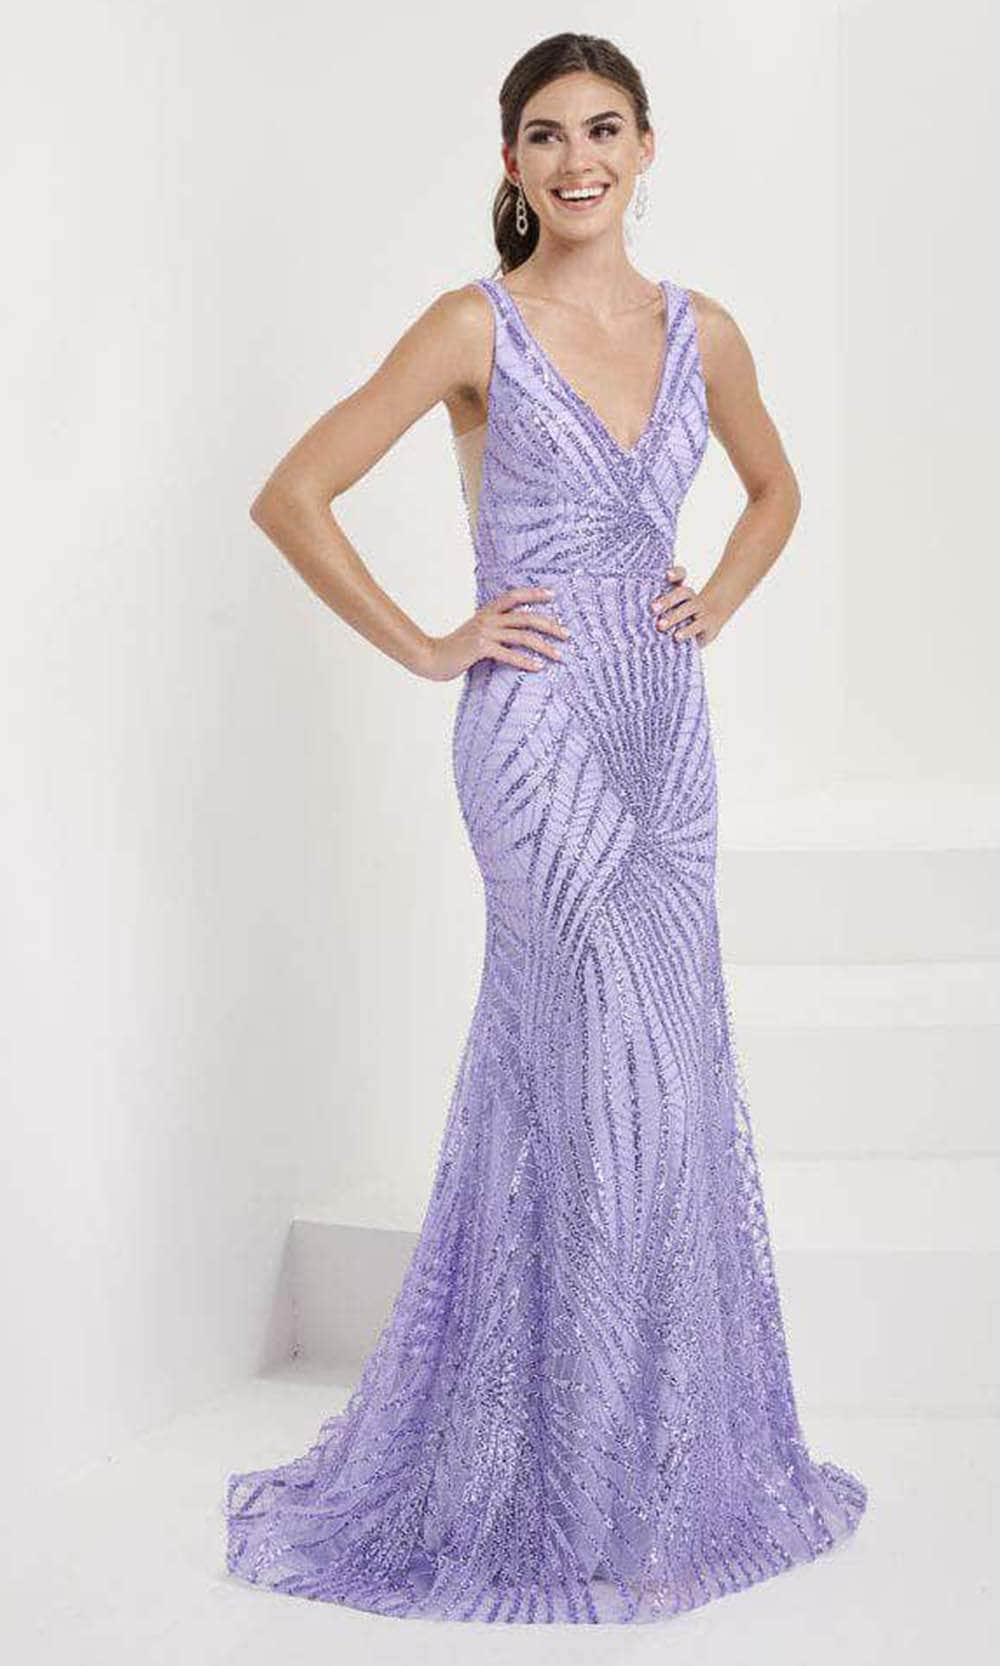 Image of Tiffany Designs 16073 - Deep V-Neck Trumpet Evening Gown